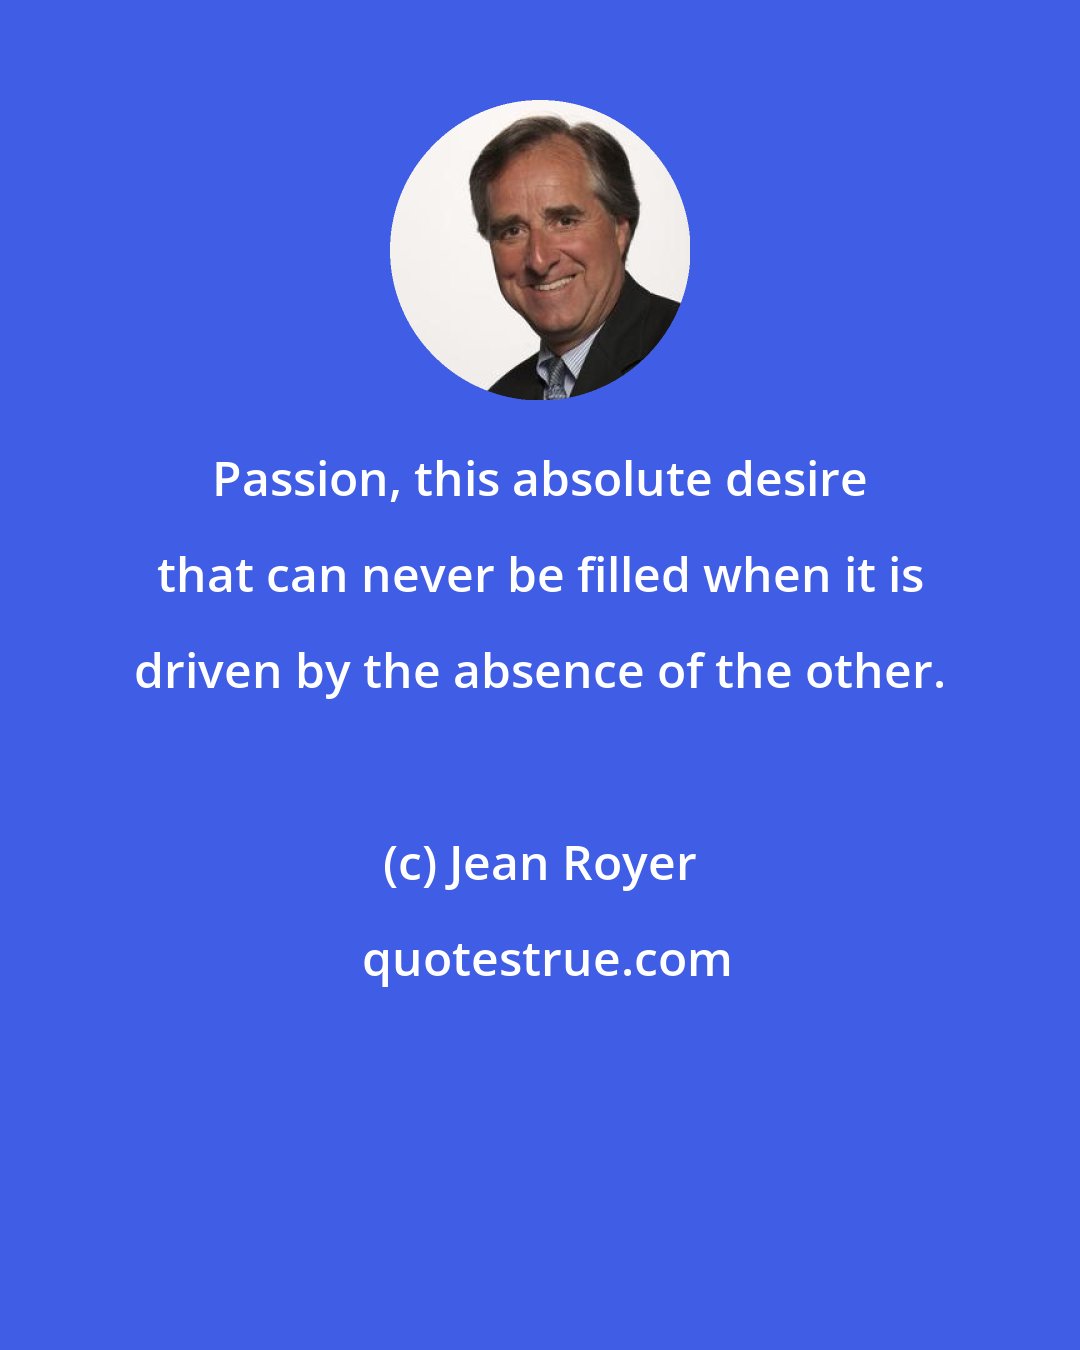 Jean Royer: Passion, this absolute desire that can never be filled when it is driven by the absence of the other.